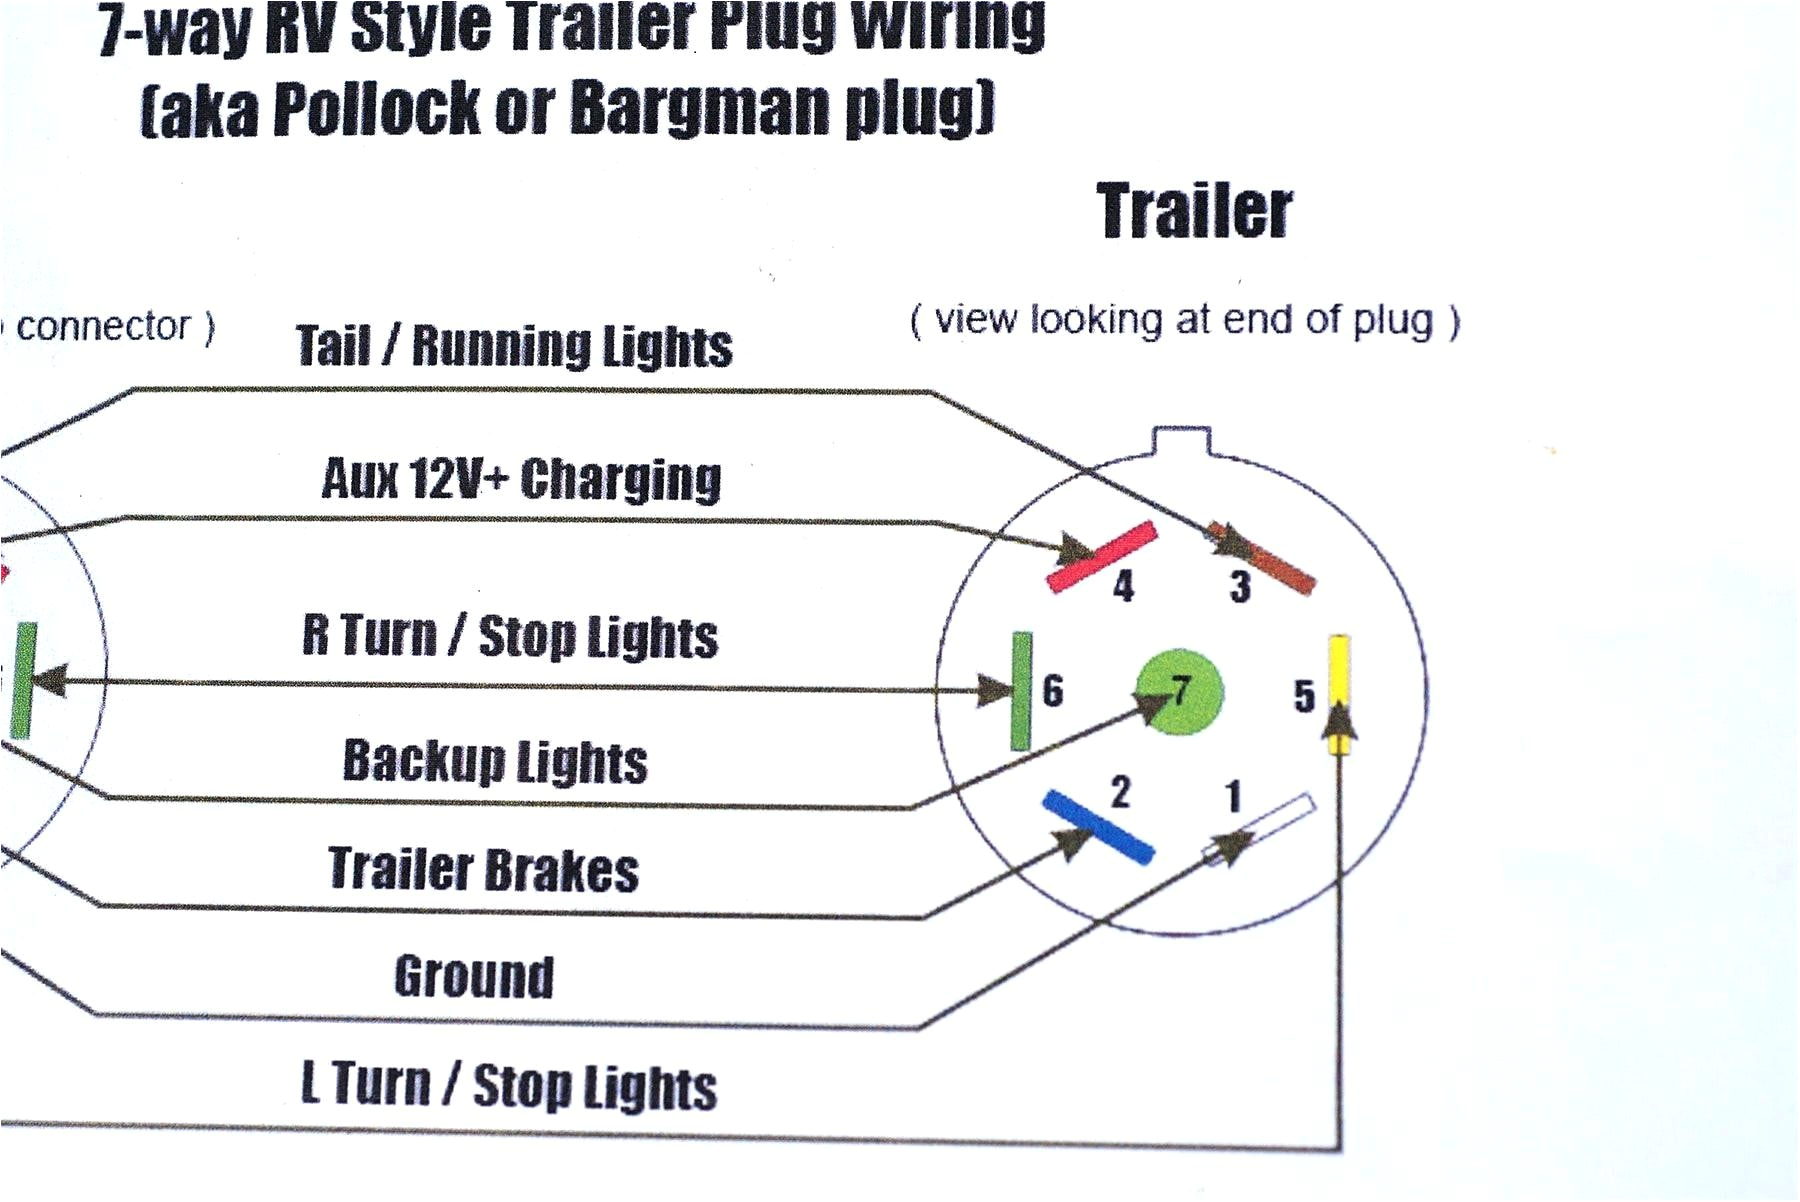 wiring diagram trailer connector fresh diagrams 7 pole 6 prong and pin of rv style plug 0 png